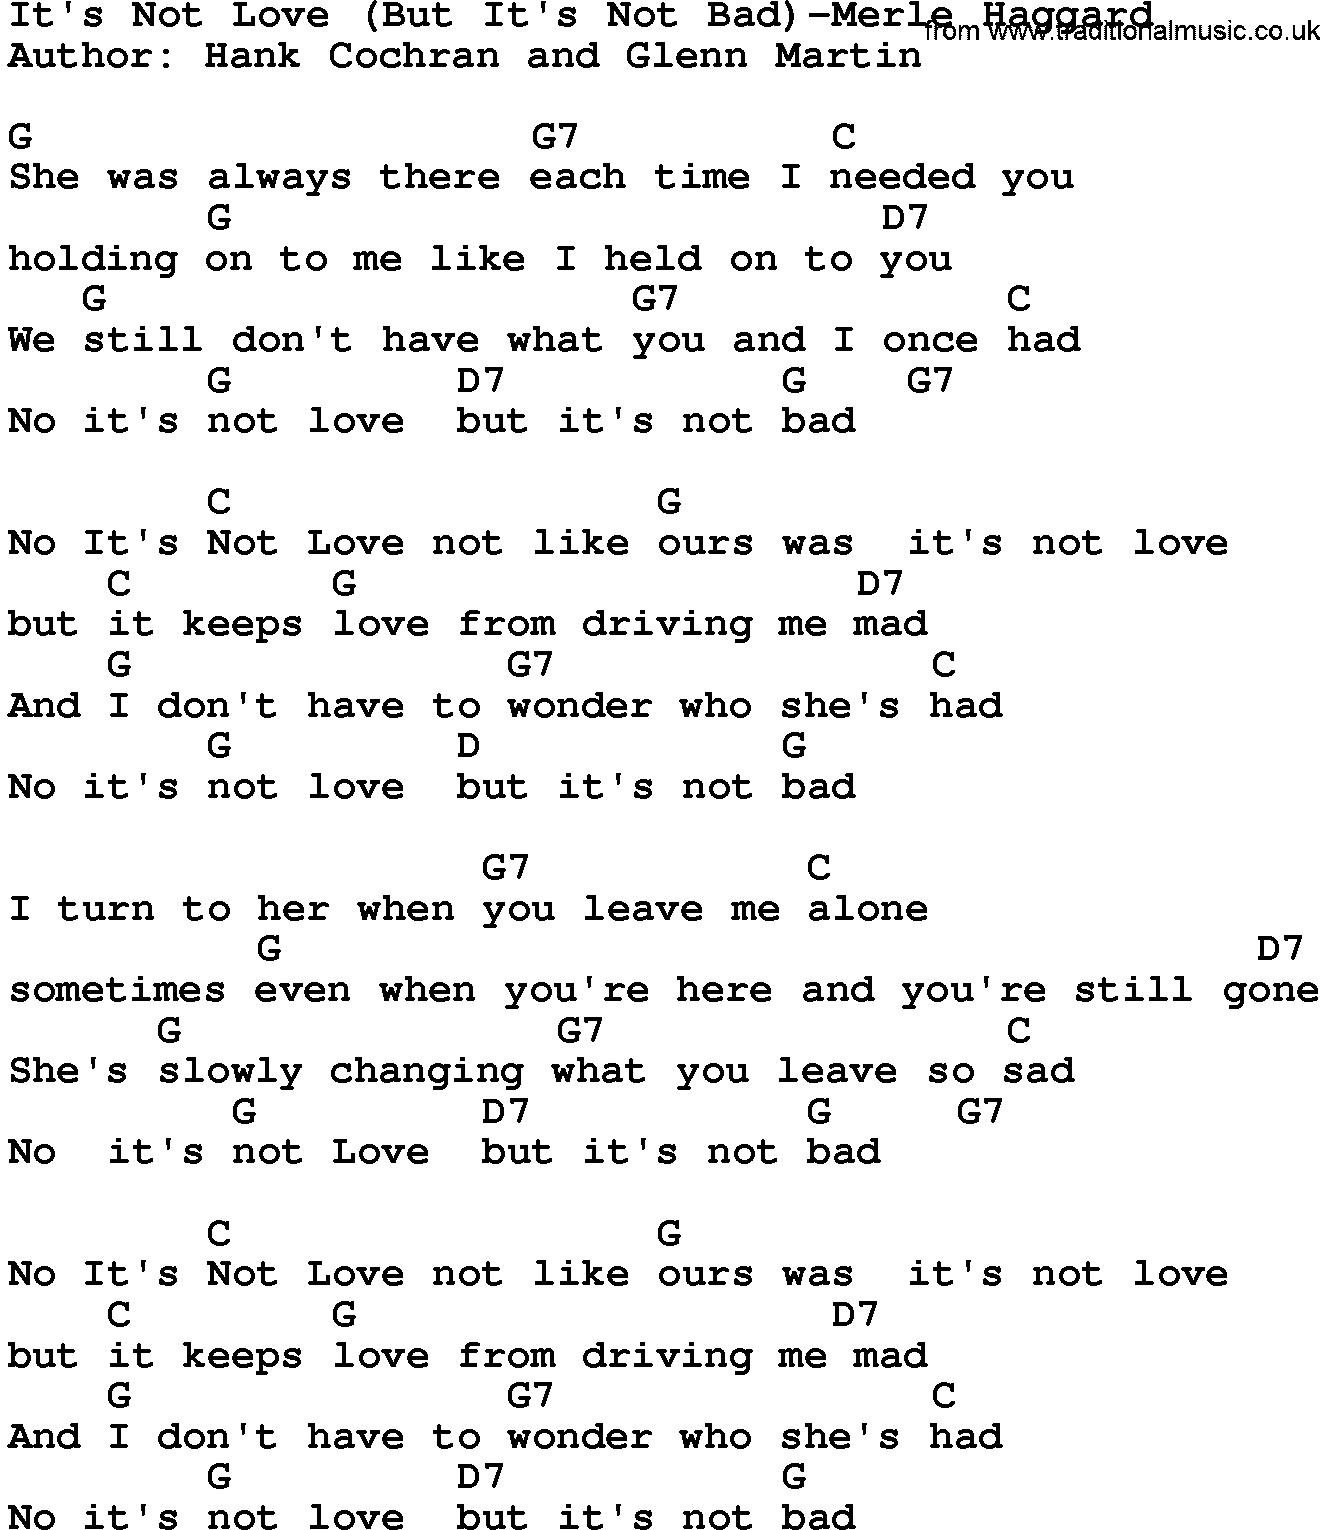 Country music song: It's Not Love(But It's Not Bad)-Merle Haggard lyrics and chords